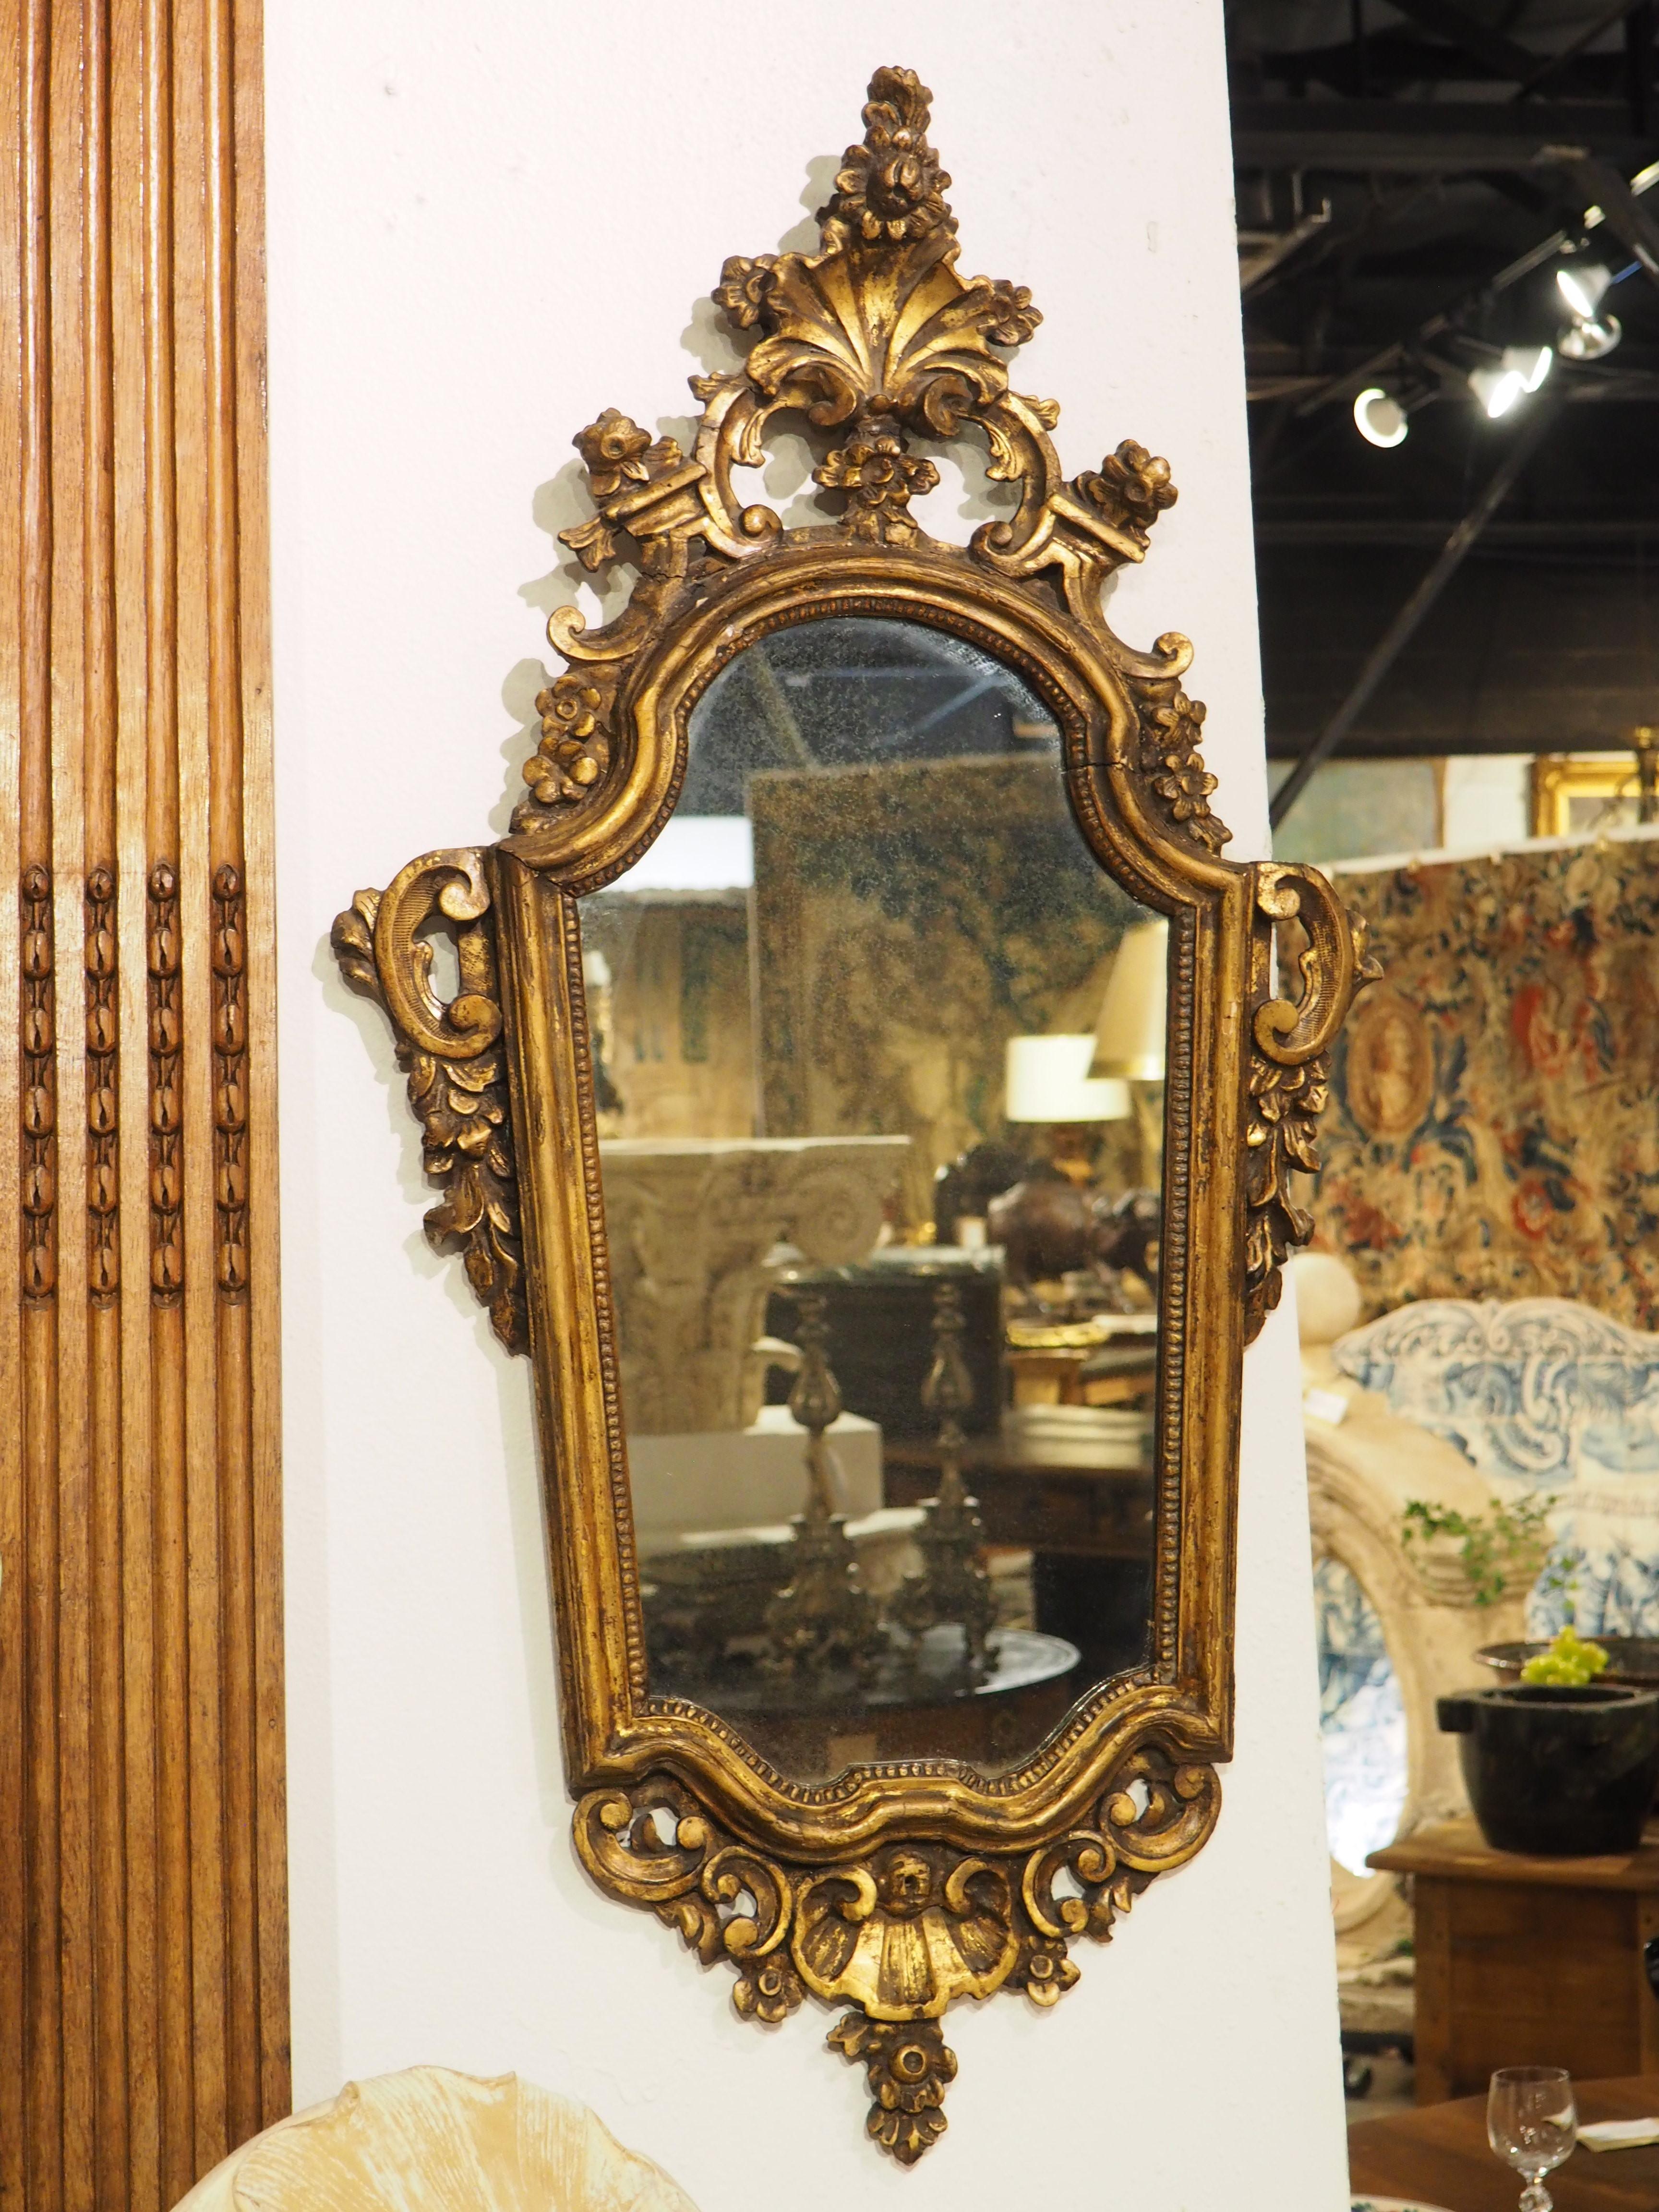 Although Rococo originated in France in the 1730s, the style was pervasive, spreading throughout Central Europe. One area noted for exceptional Rococo creations was northern Italy, in particular, Venice, where this giltwood mirror was hand-carved in